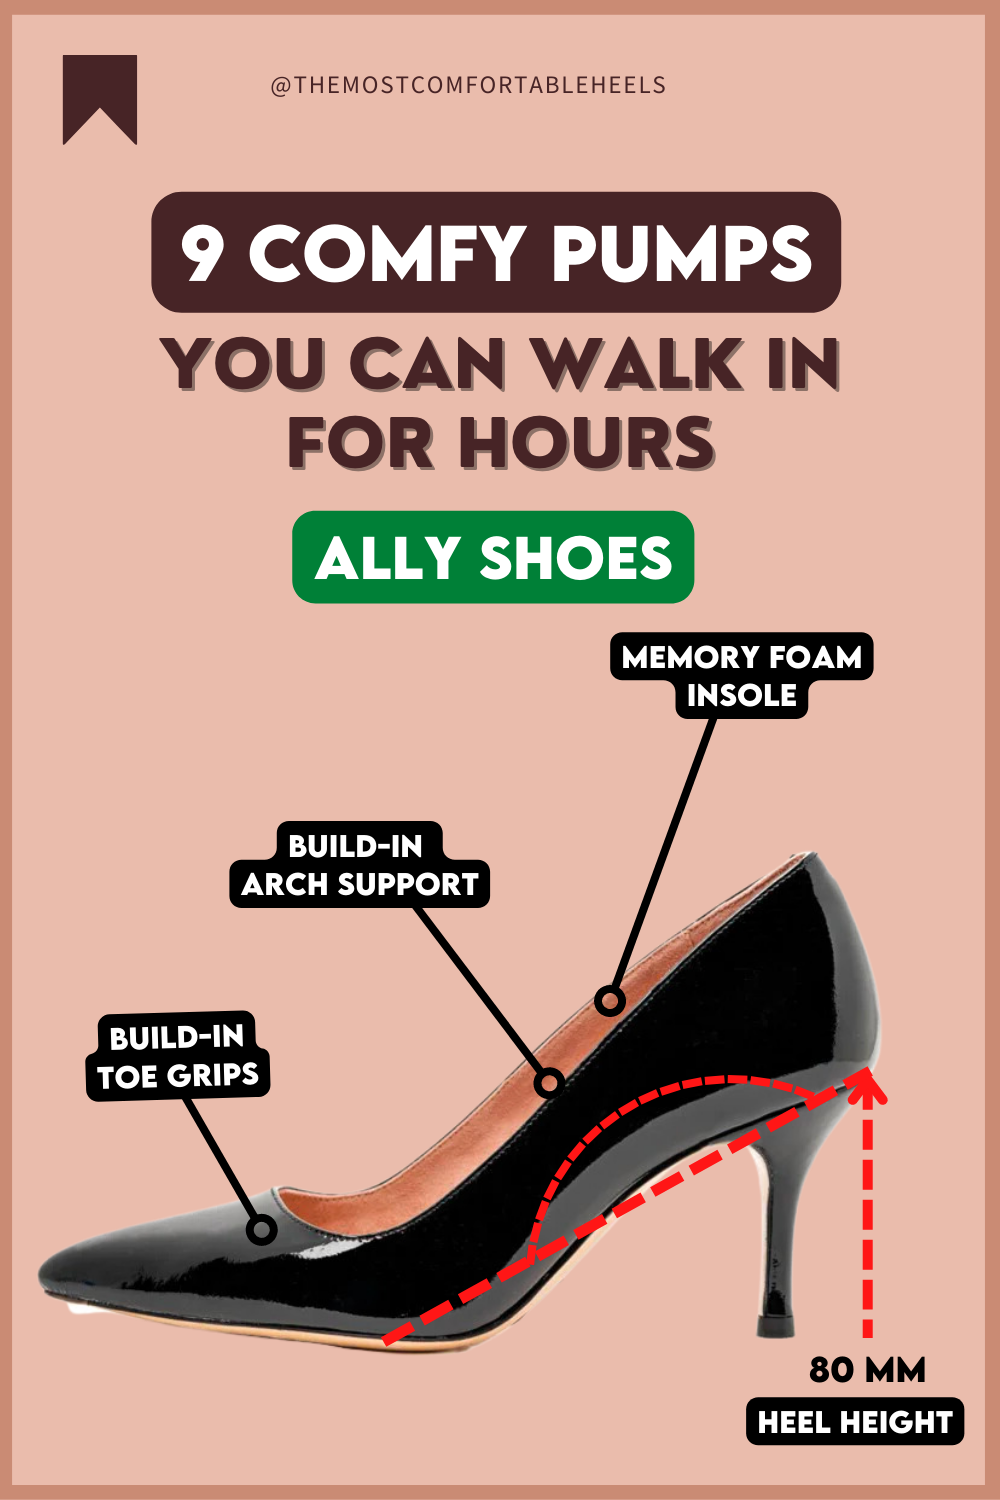 Why are high heels called pumps? - Quora